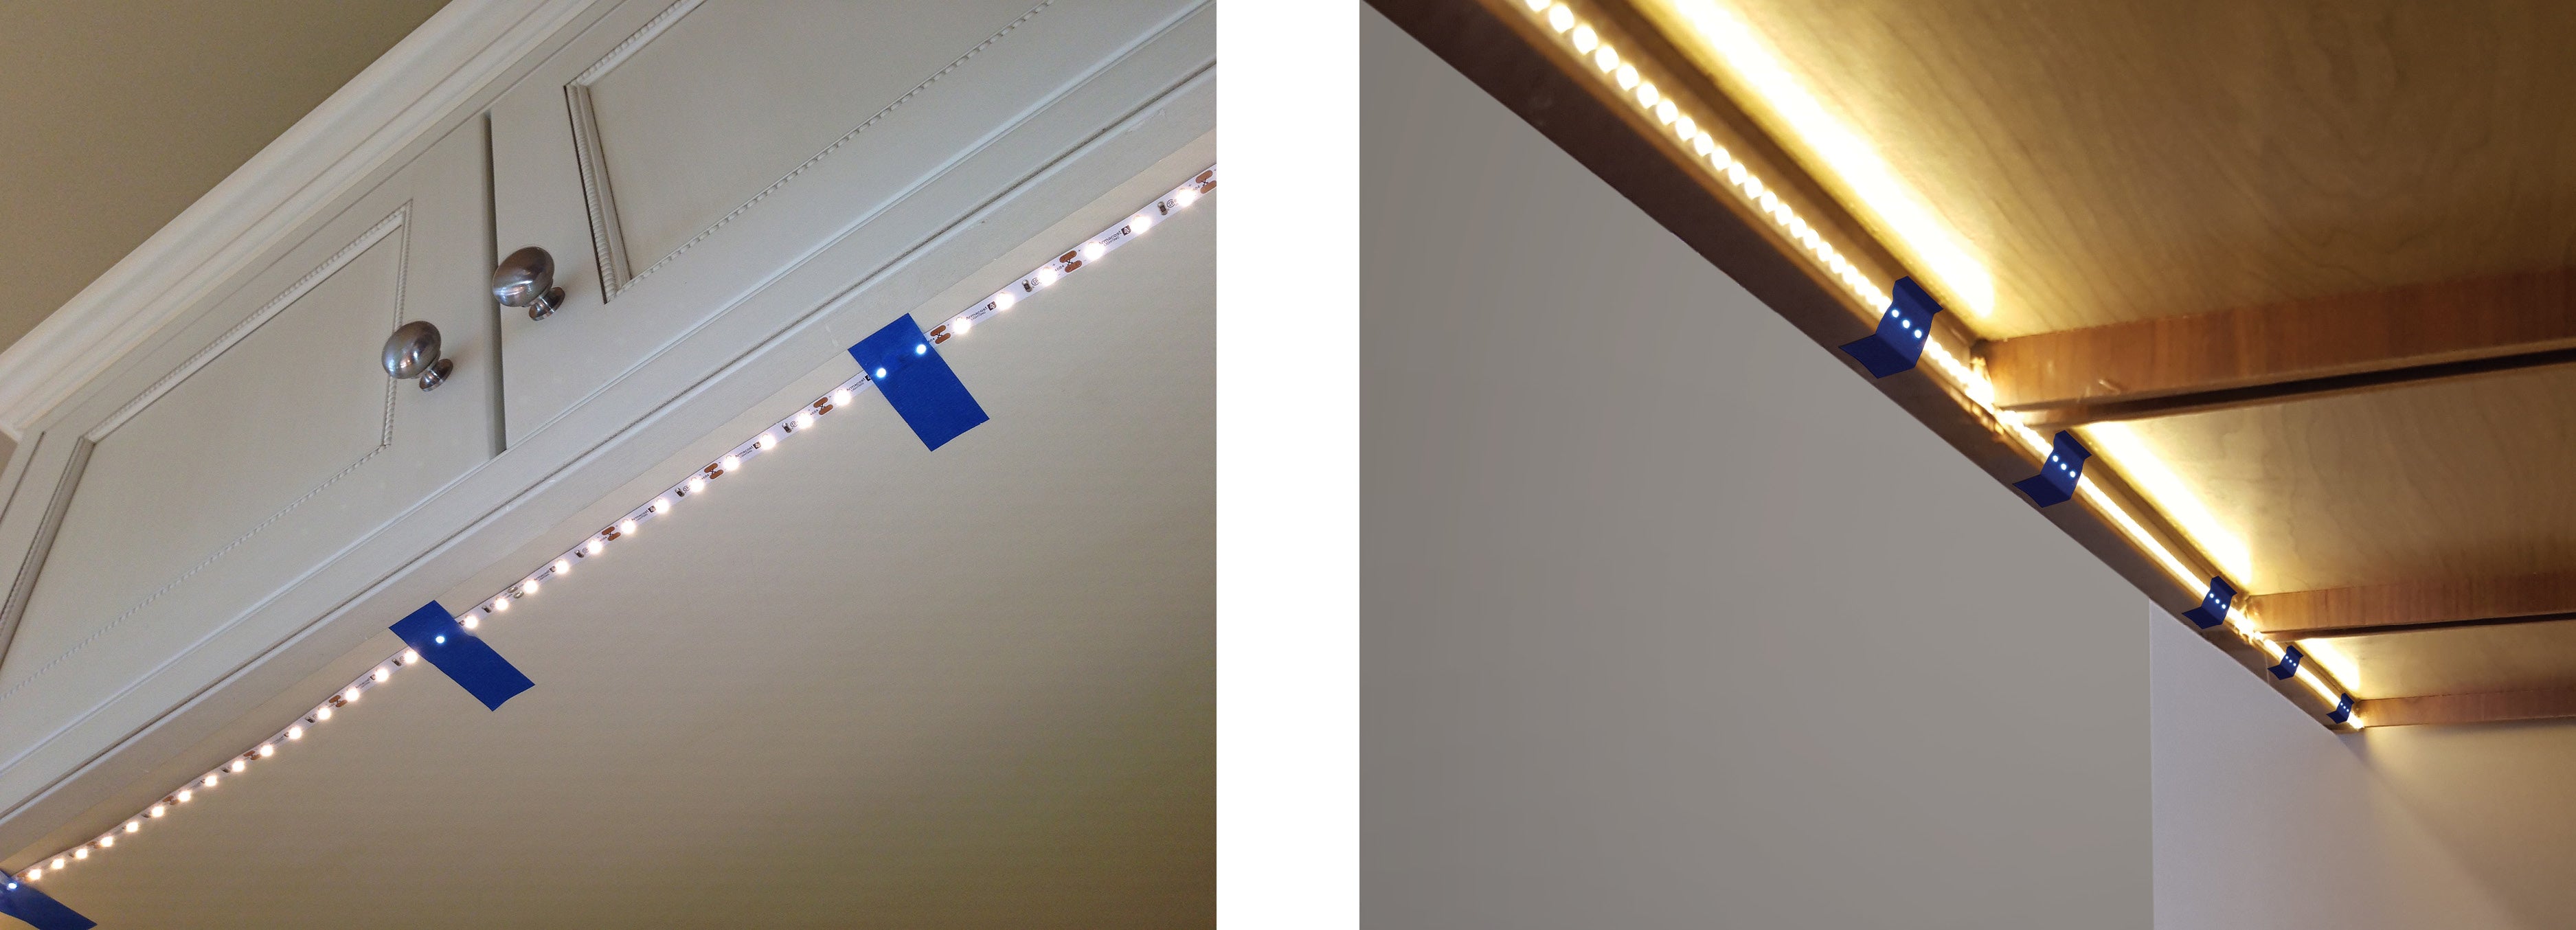 Temporary installation of LED tape light with painters tape